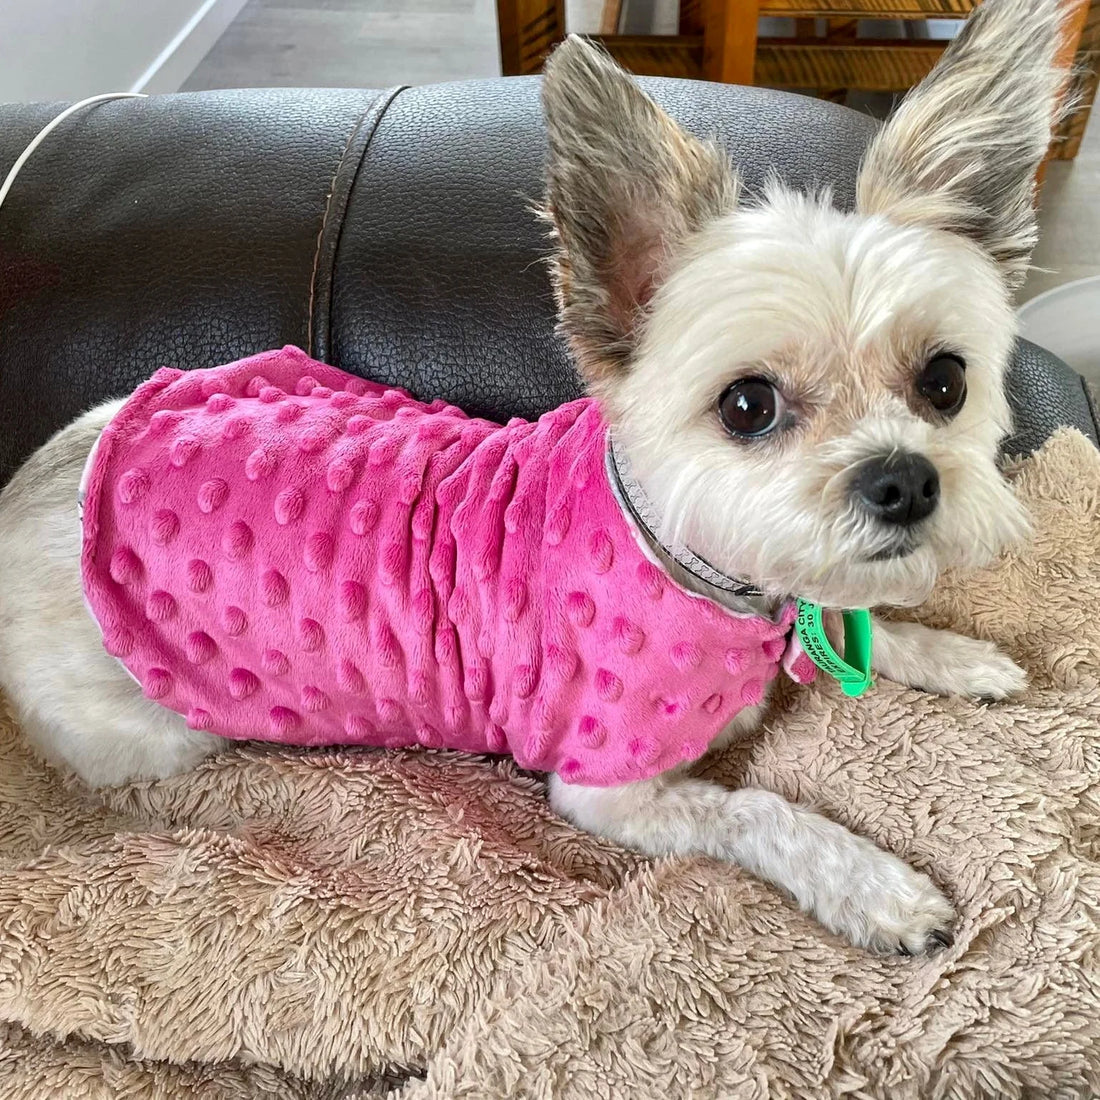 "Snuggle Up with Snoodle Dog Nightwear: Why Your Furry Friend Needs a Set!"